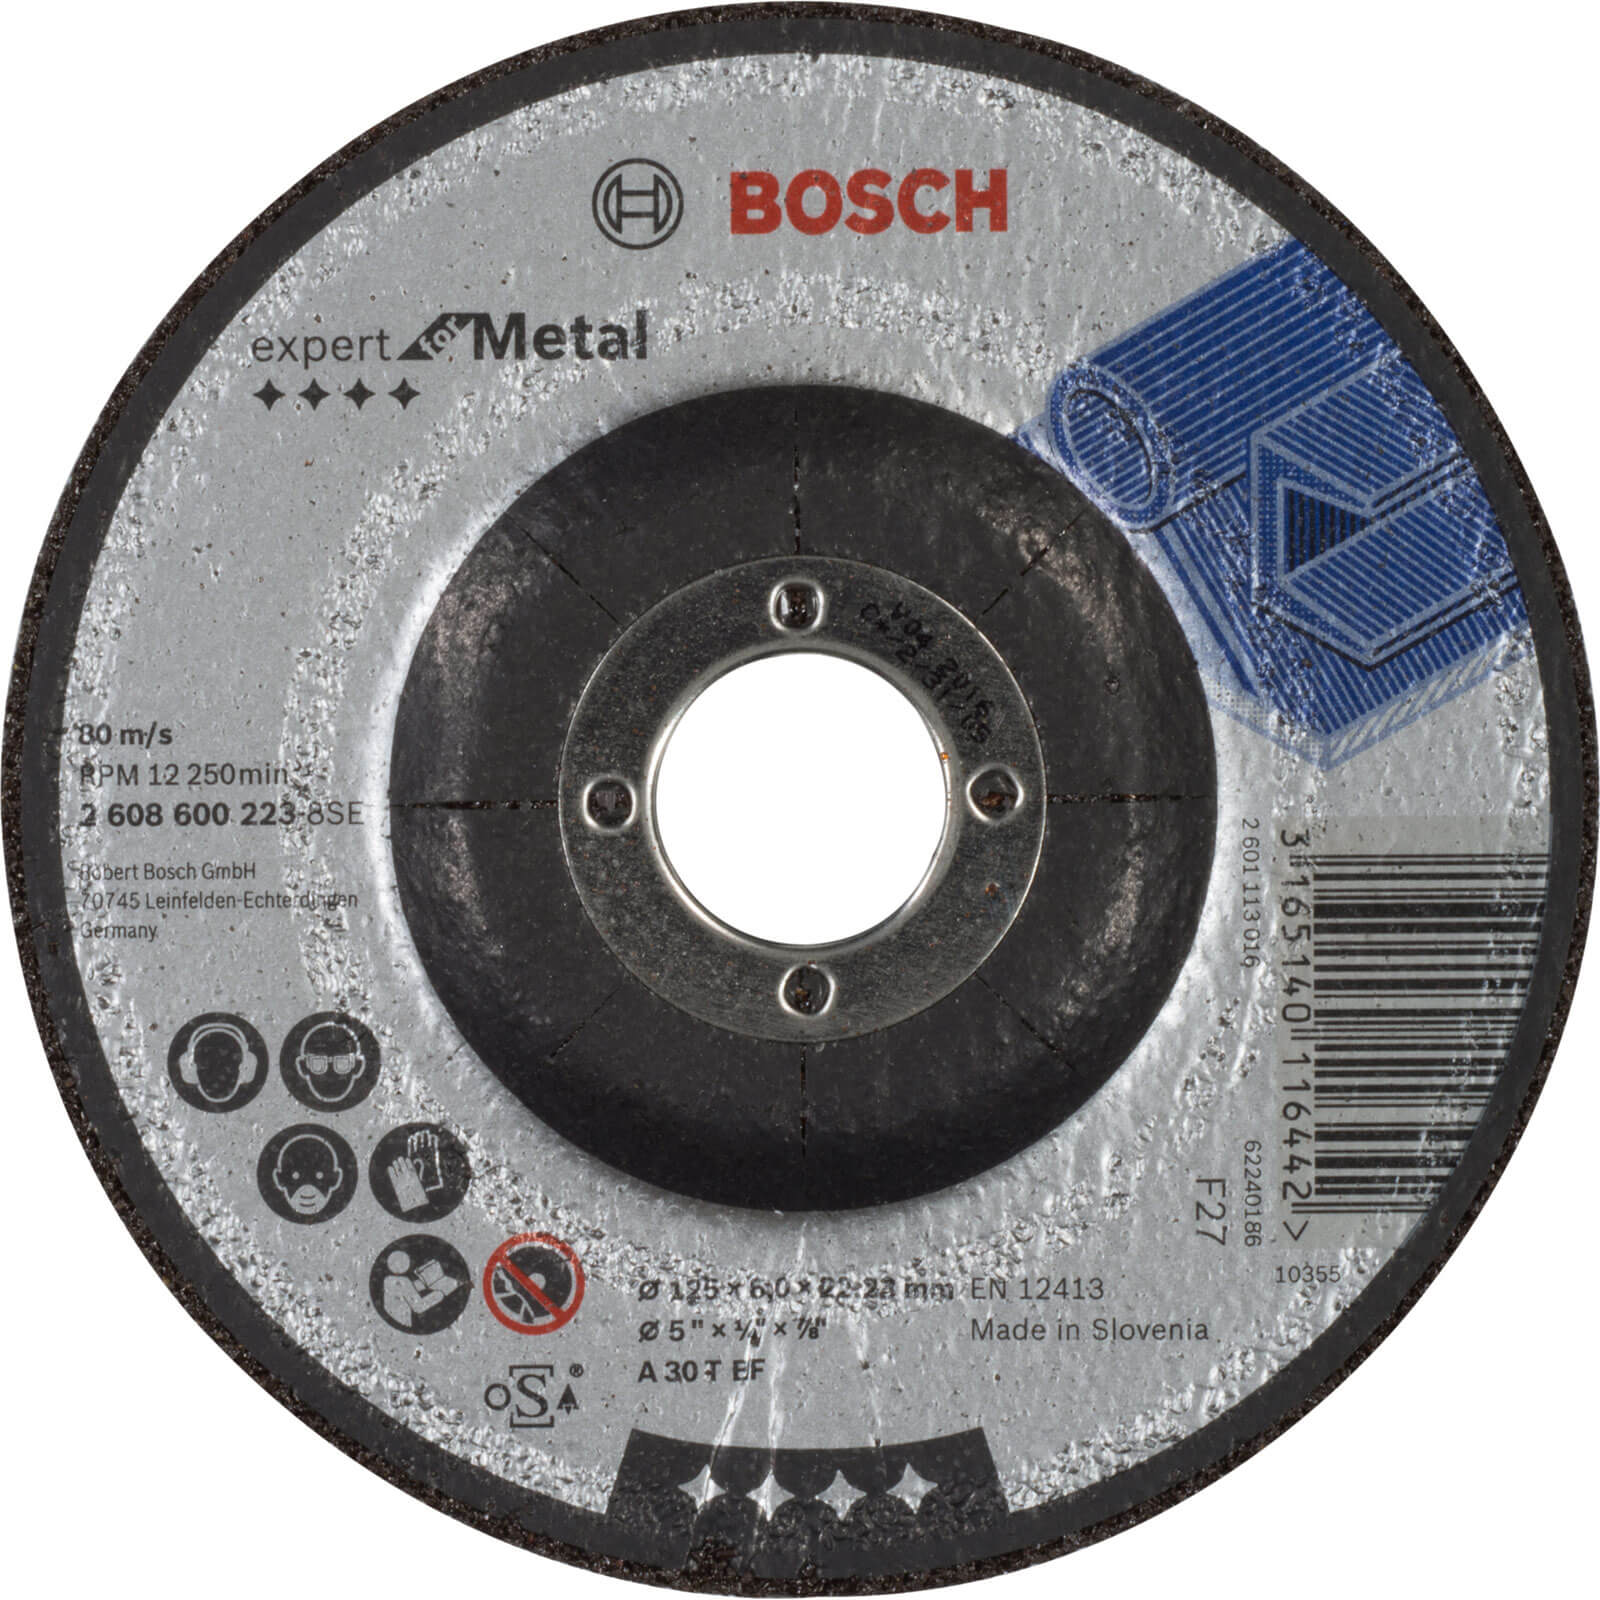 Image of Bosch A30T BF Drepressed Centre Metal Grinding Disc 125mm